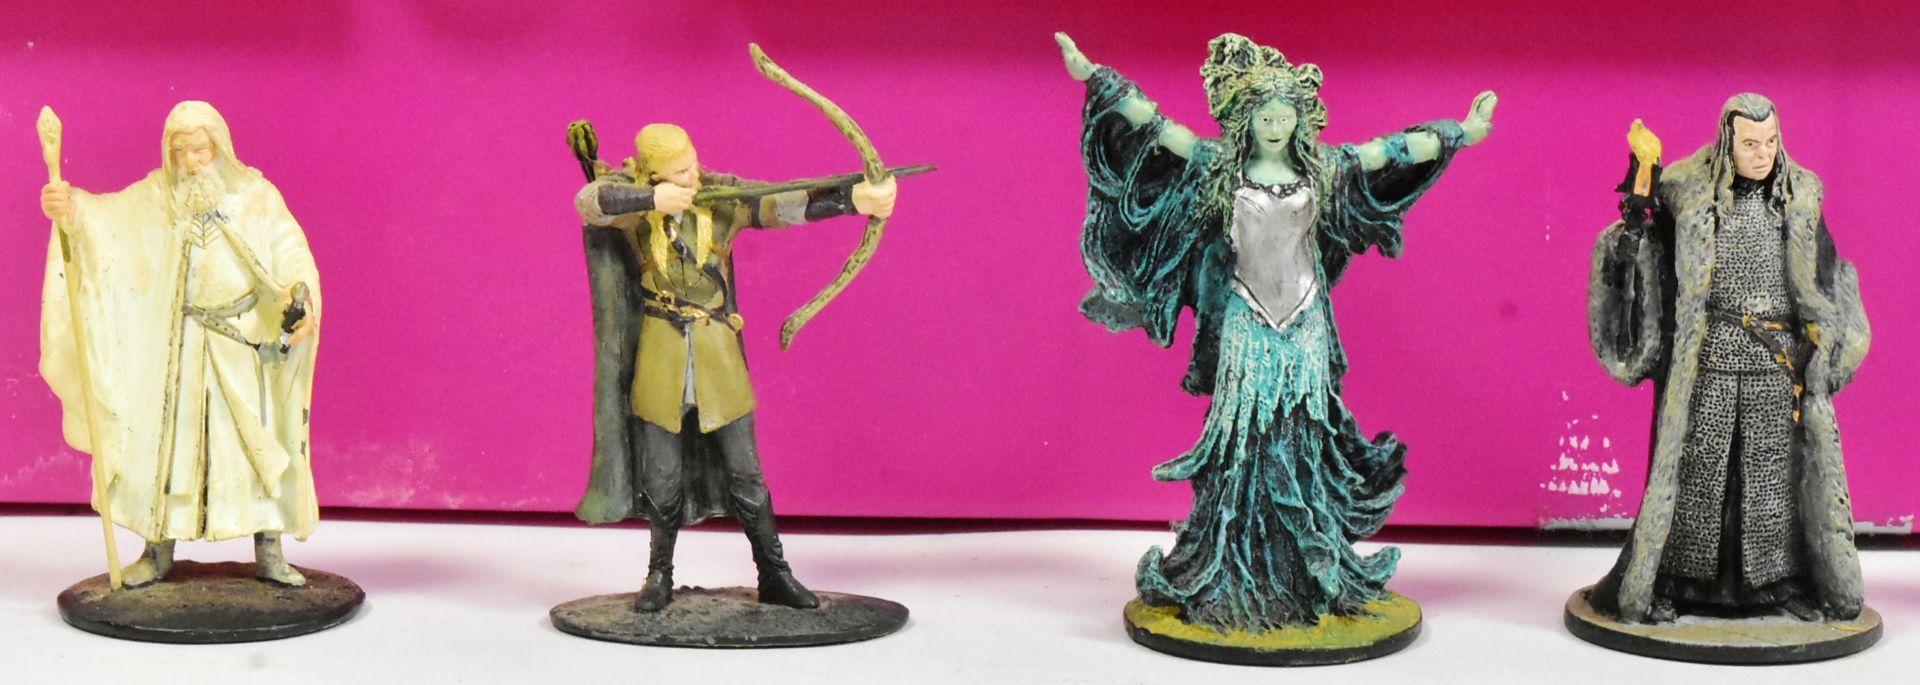 LORD OF THE RINGS - COLLECTIBLE CHESS FIGURES - Image 2 of 6